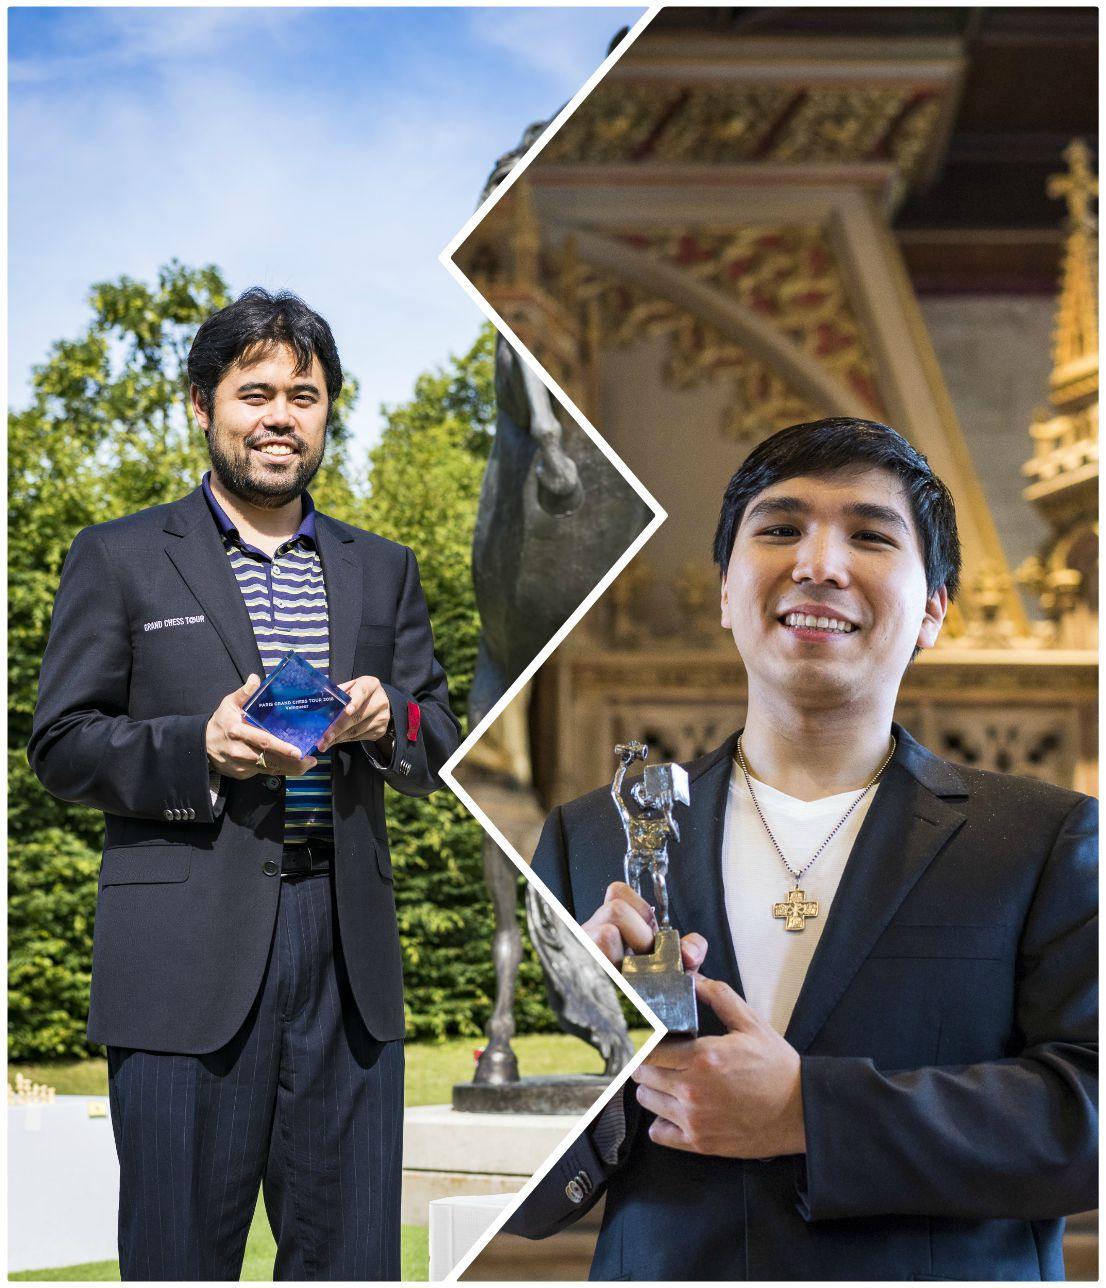 Hikaru Nakamura Left Won The Paris Gct In Late June And Wesley So Who Your Next Move Leuven Belgium